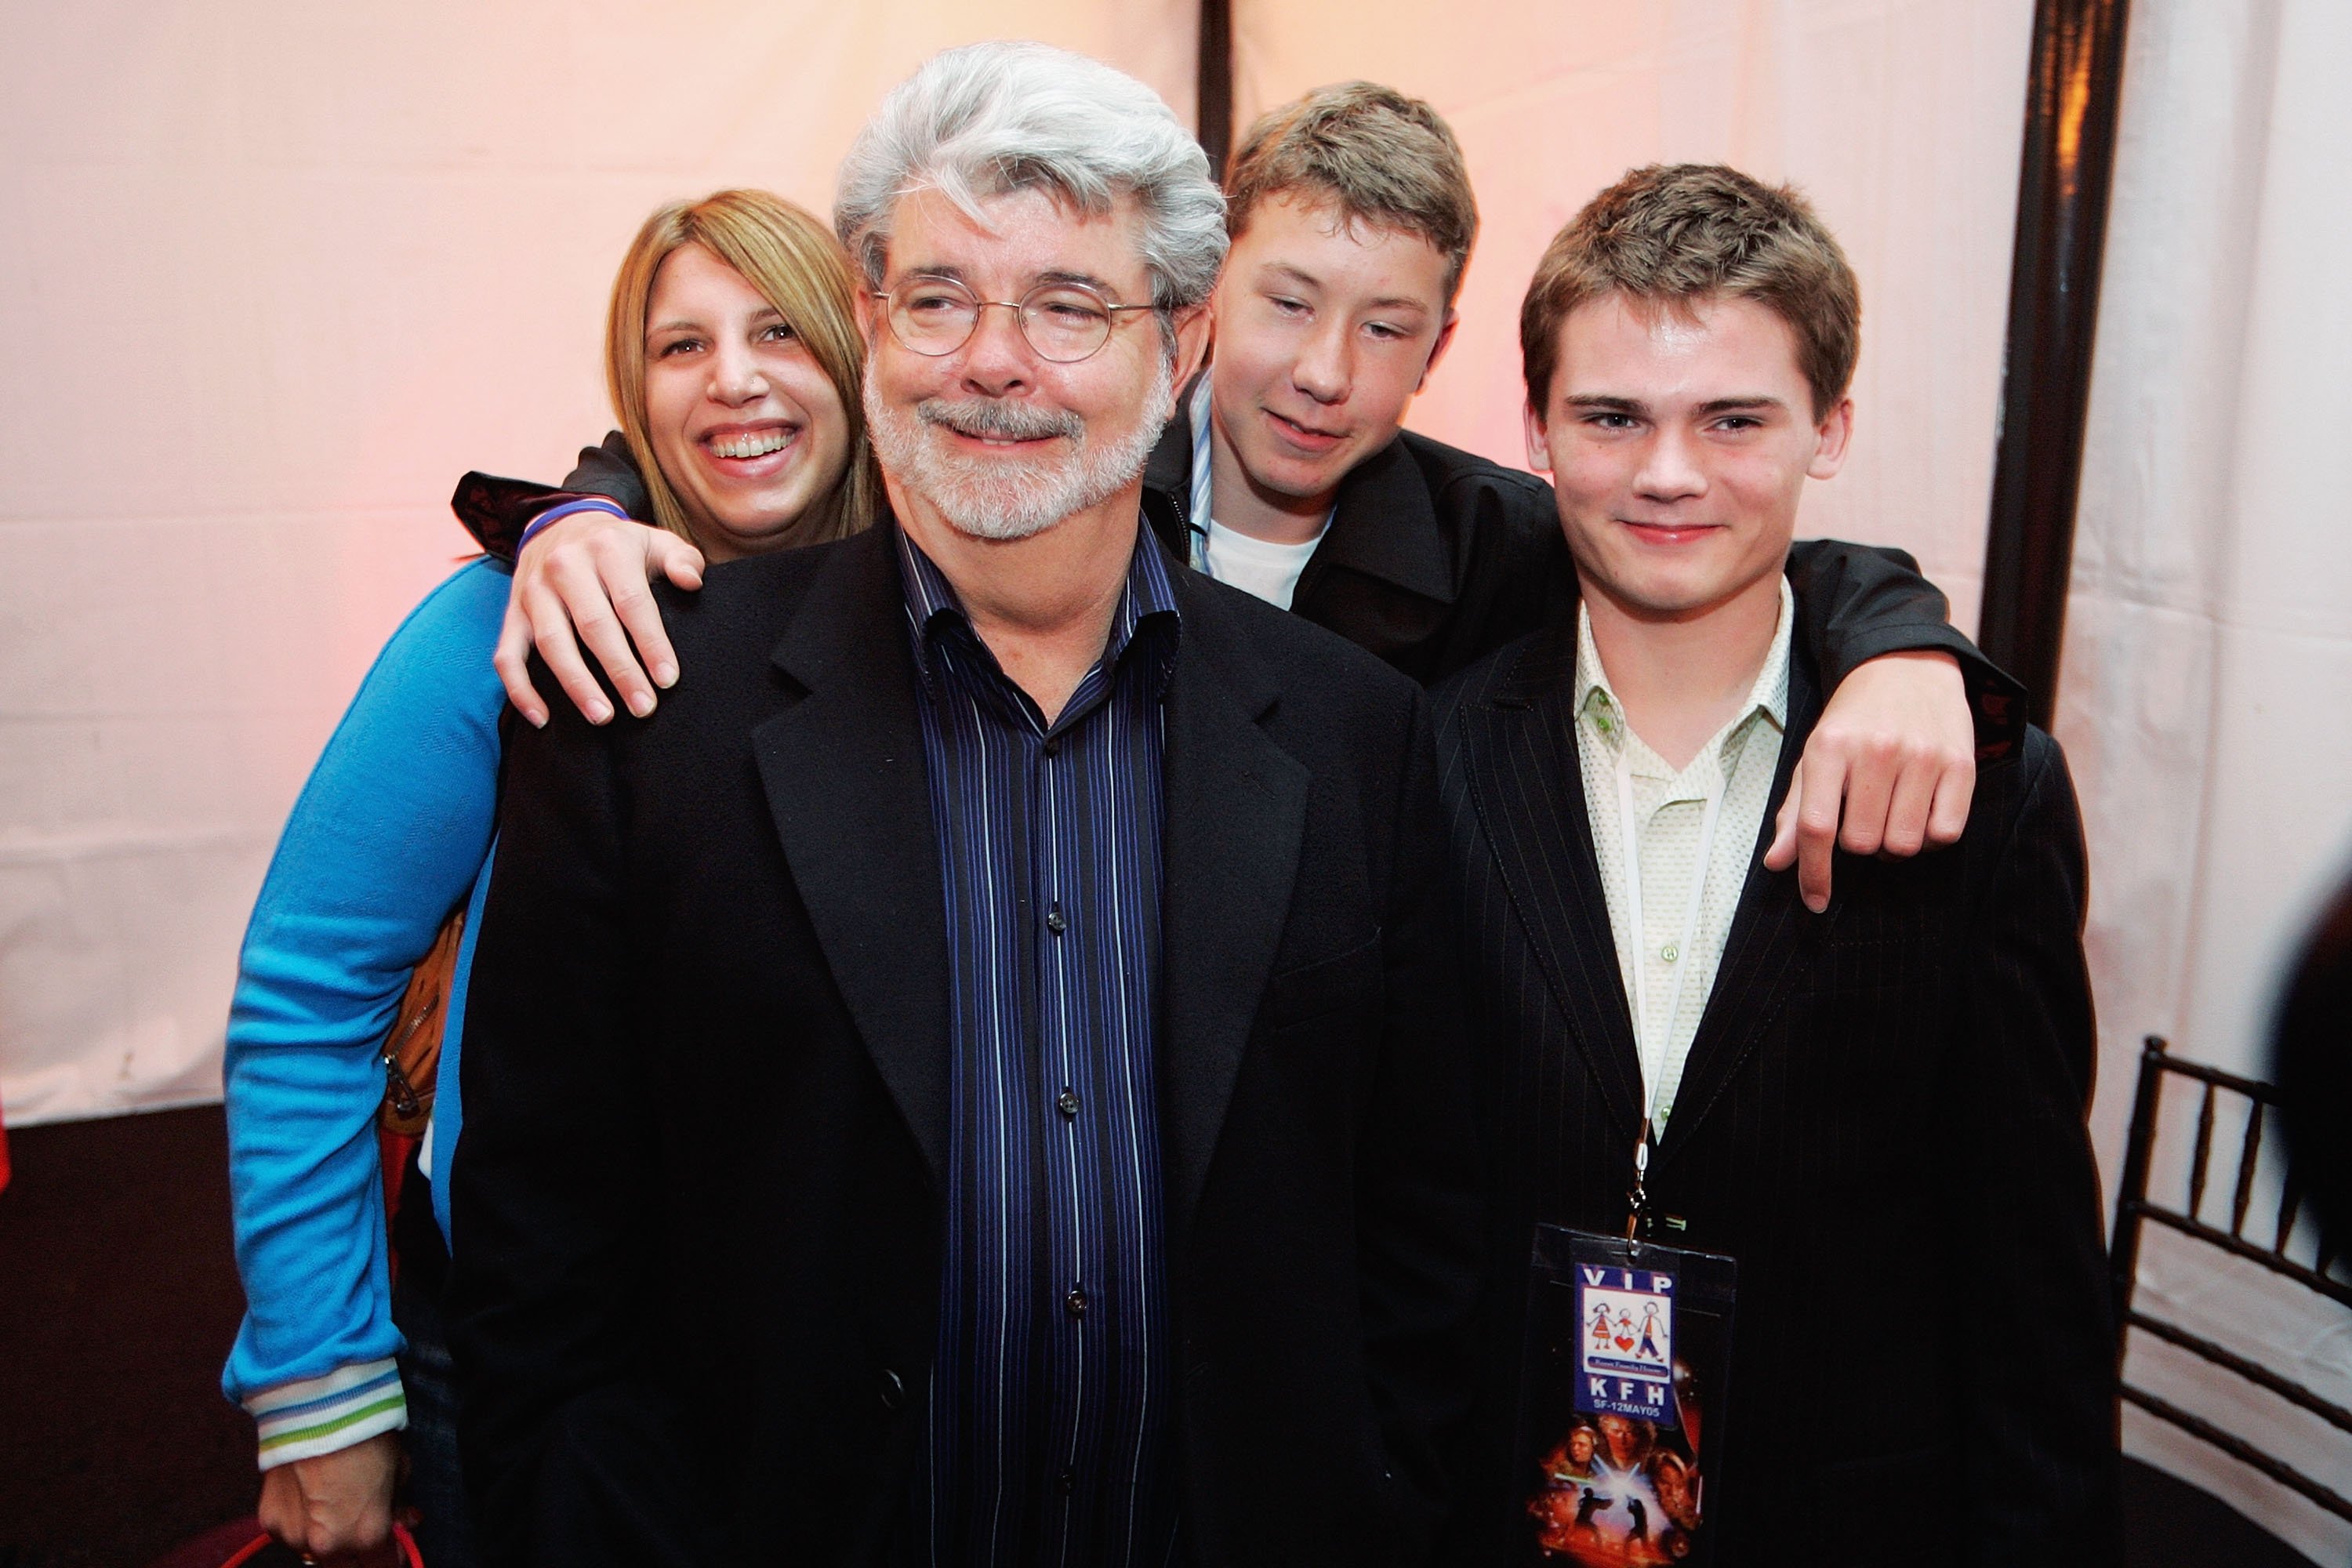 George Lucas, Amanda Lucas, Jett Lucas and Jake Lloyd on May 12, 2005, in San Francisco, California | Source: Getty Images 